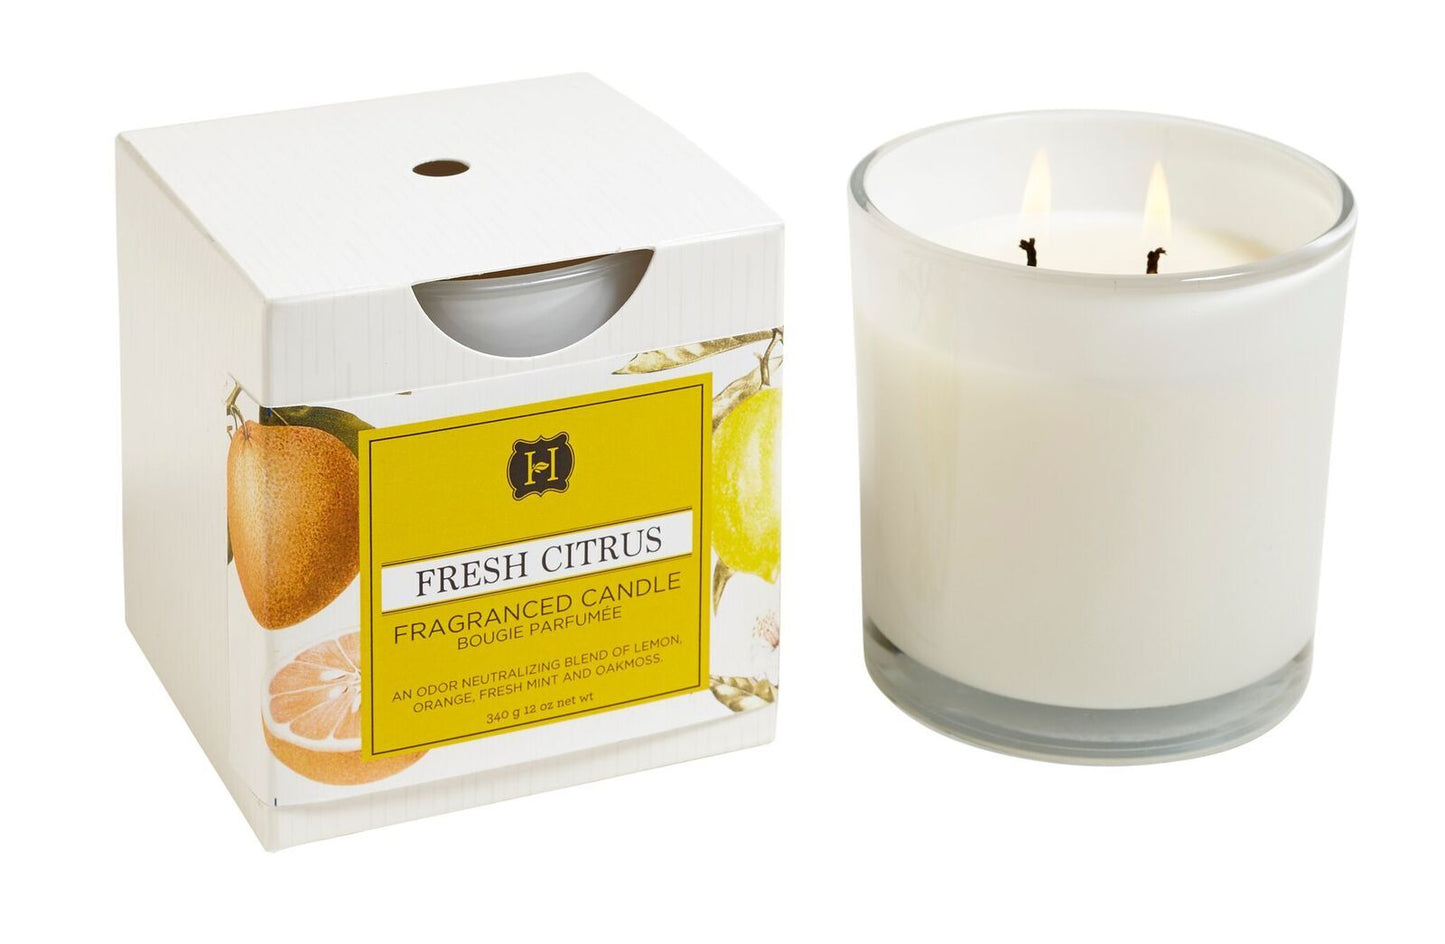 FRESH CITRUS Hillhouse Naturals 12 oz White Glass 2-Wick Scented Jar Candle